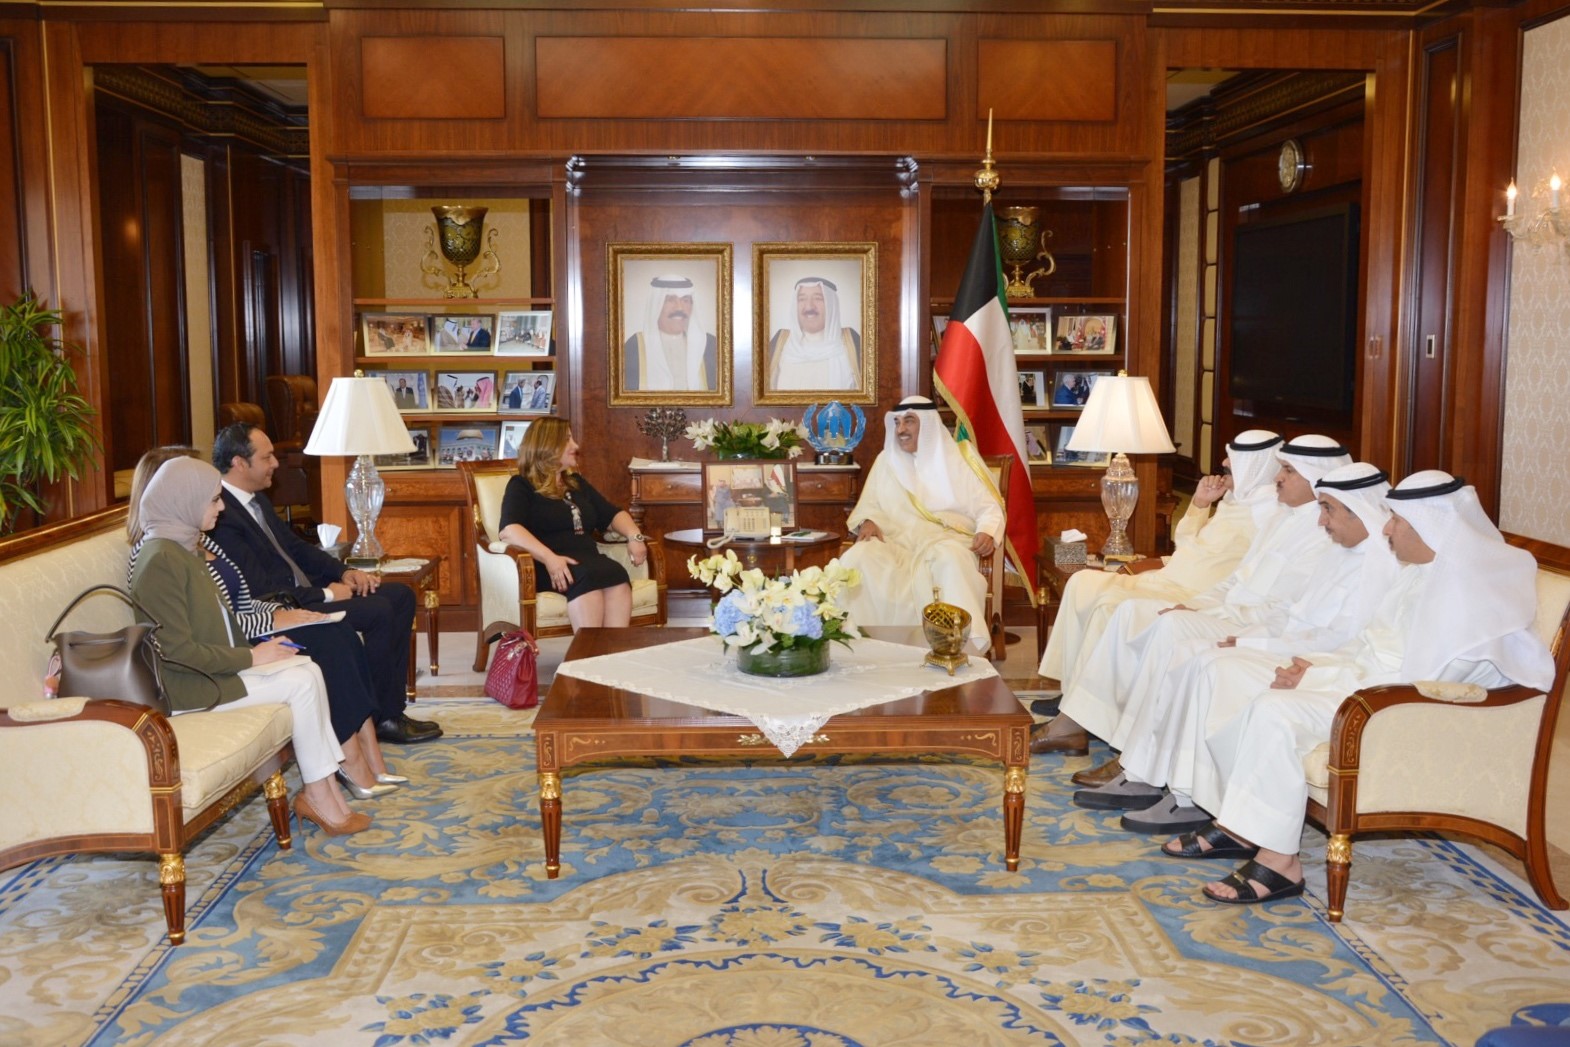 First Deputy Prime Minister and Foreign Minister Sheikh Sabah Al-Khaled Al-Hamad Al-Sabah with Dr. Hanan Hamdan, Head of the UN High Commissioner for Refugees (UNHCR) office in Kuwait